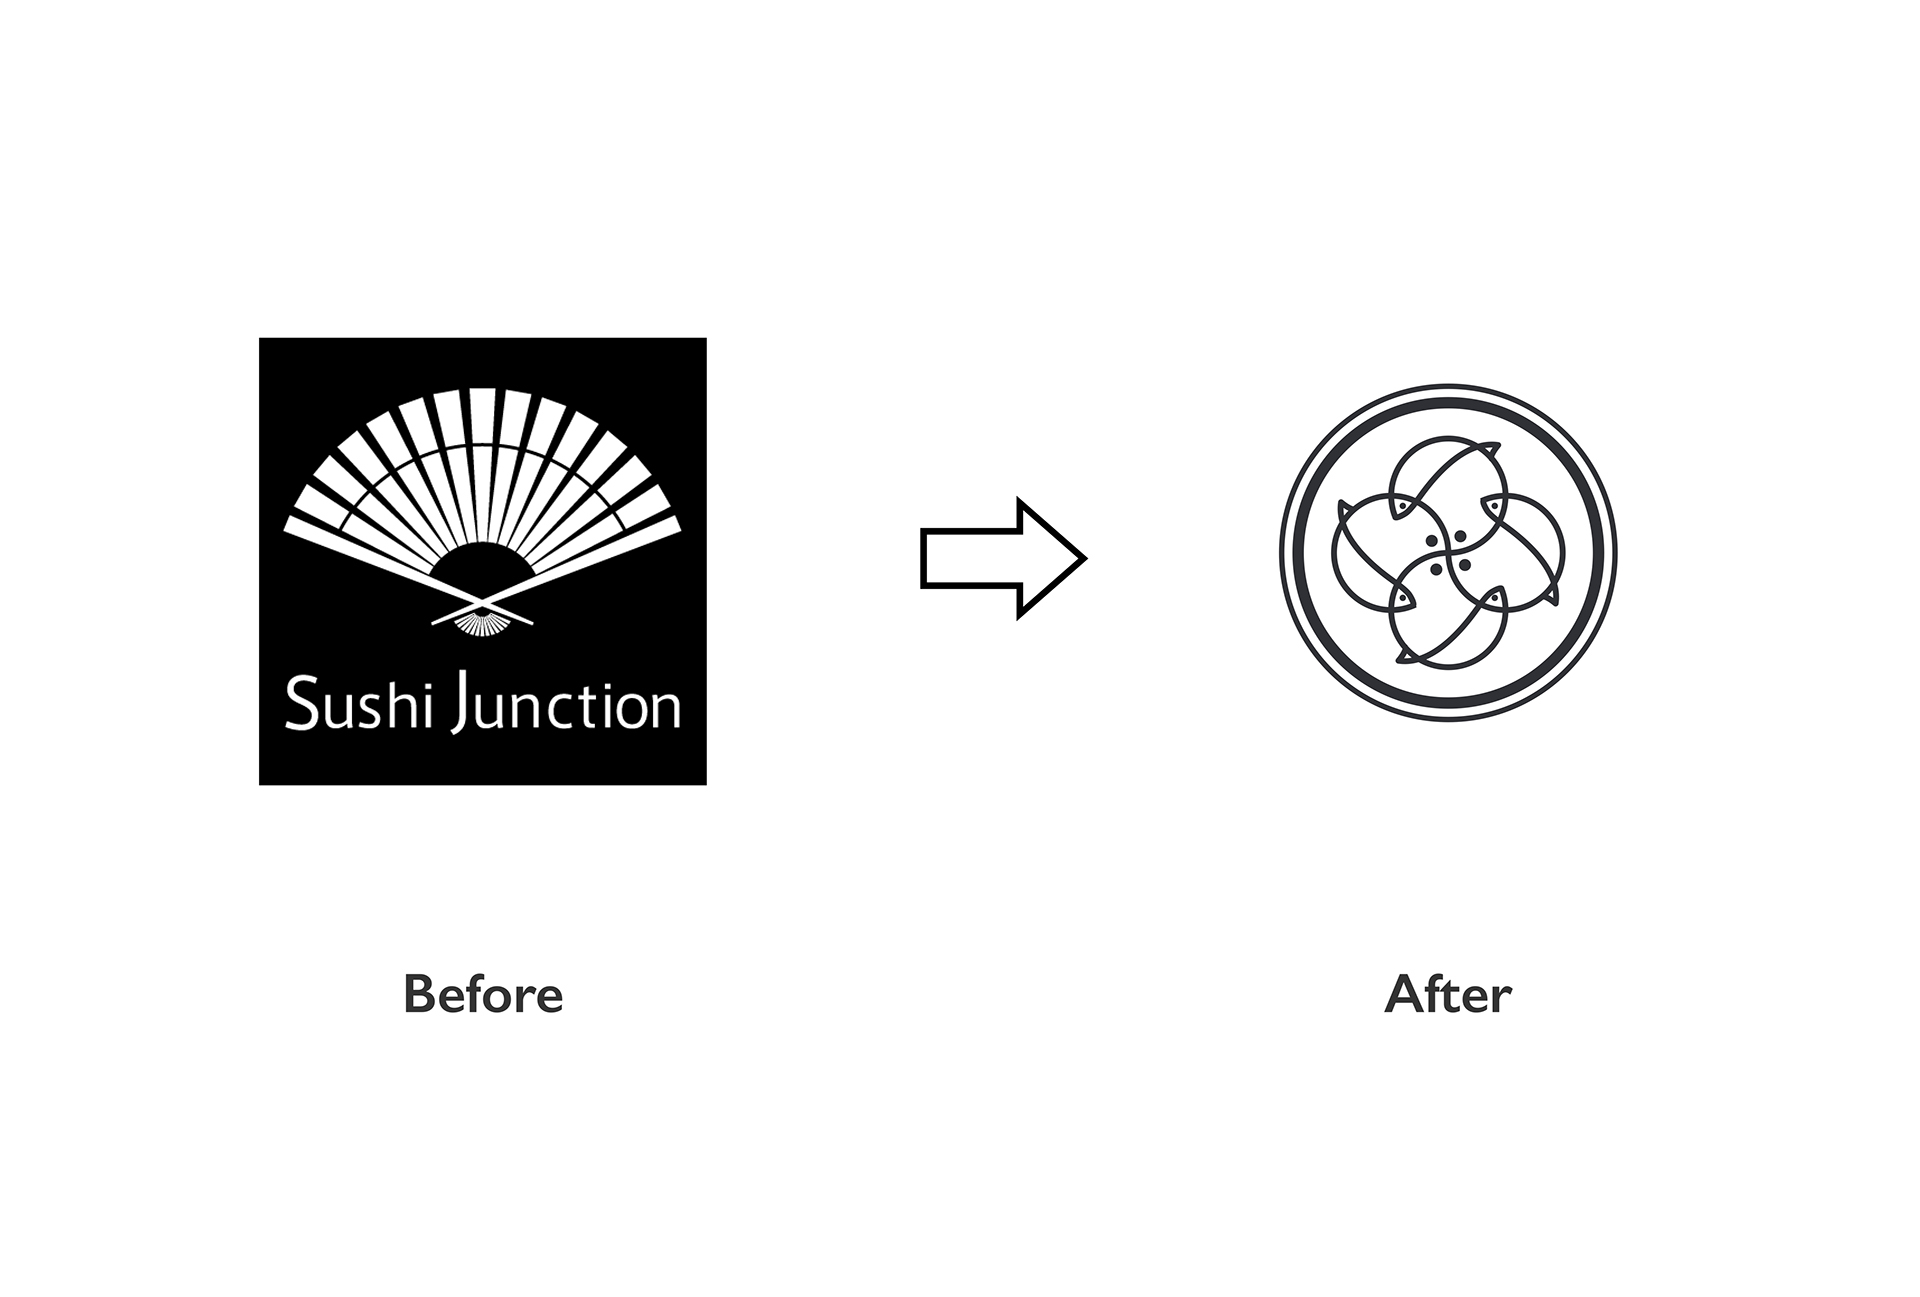 Branding for Sushi Junction by Lee Ching Tat